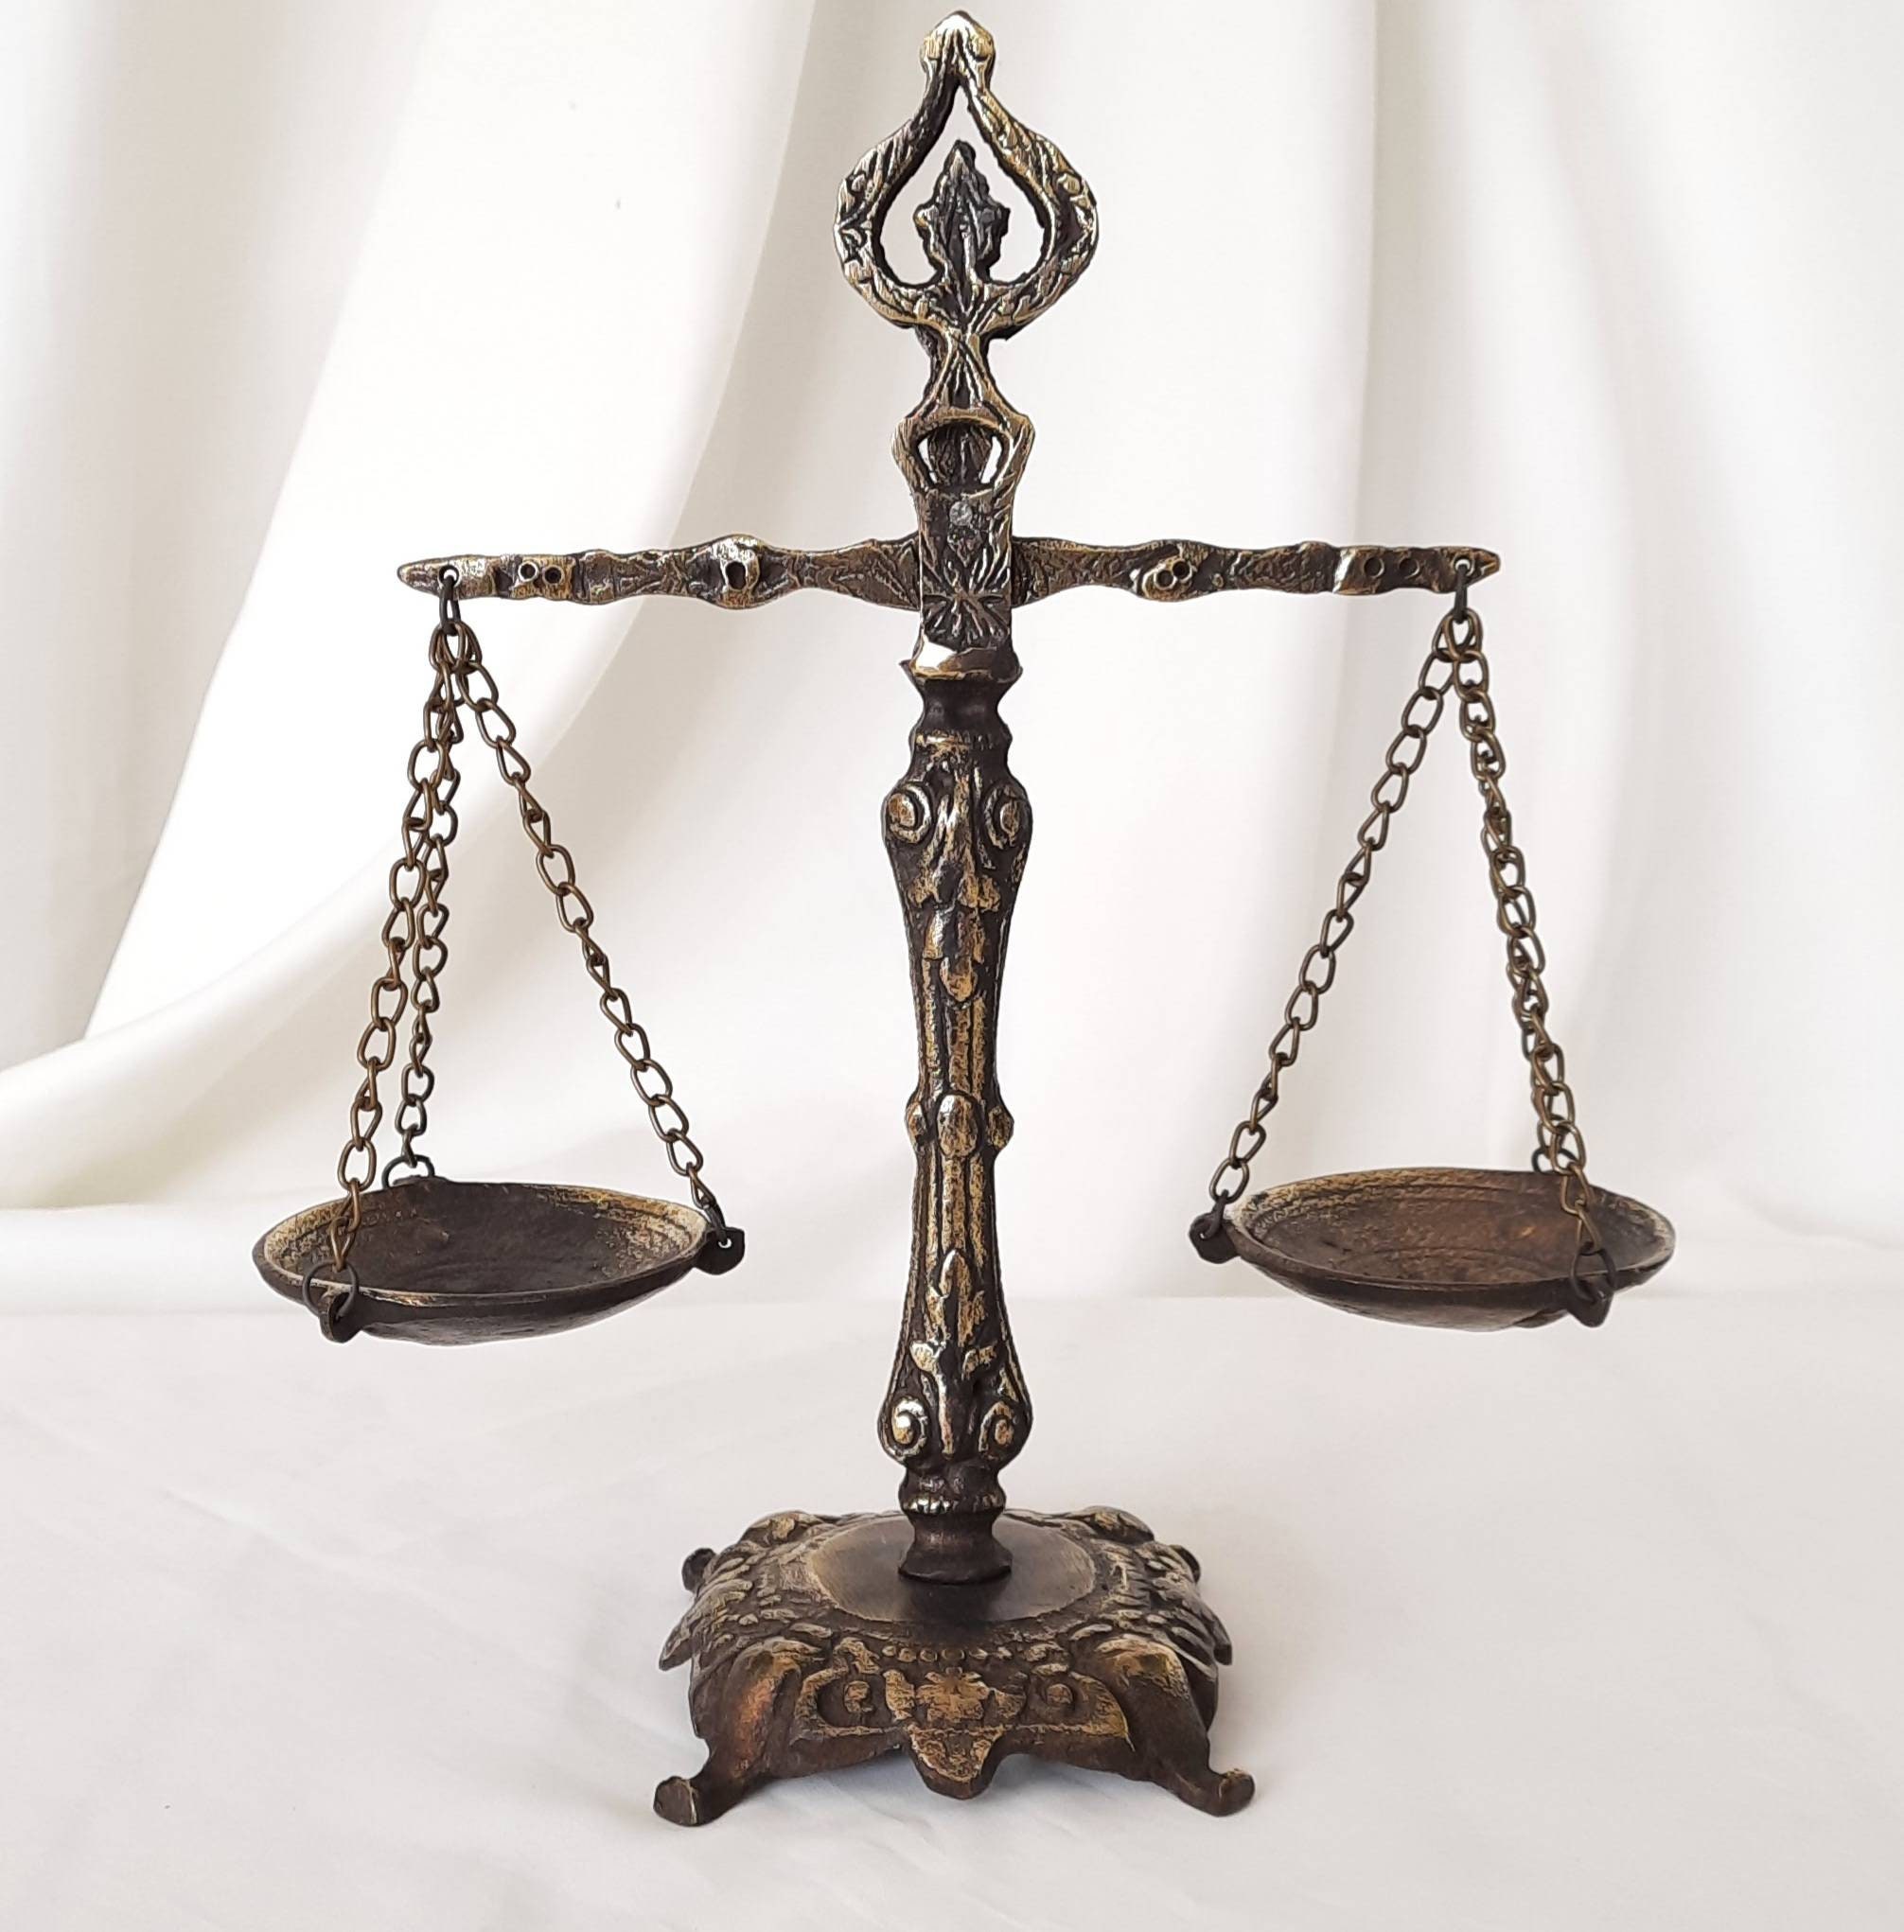 balanced scales of justice